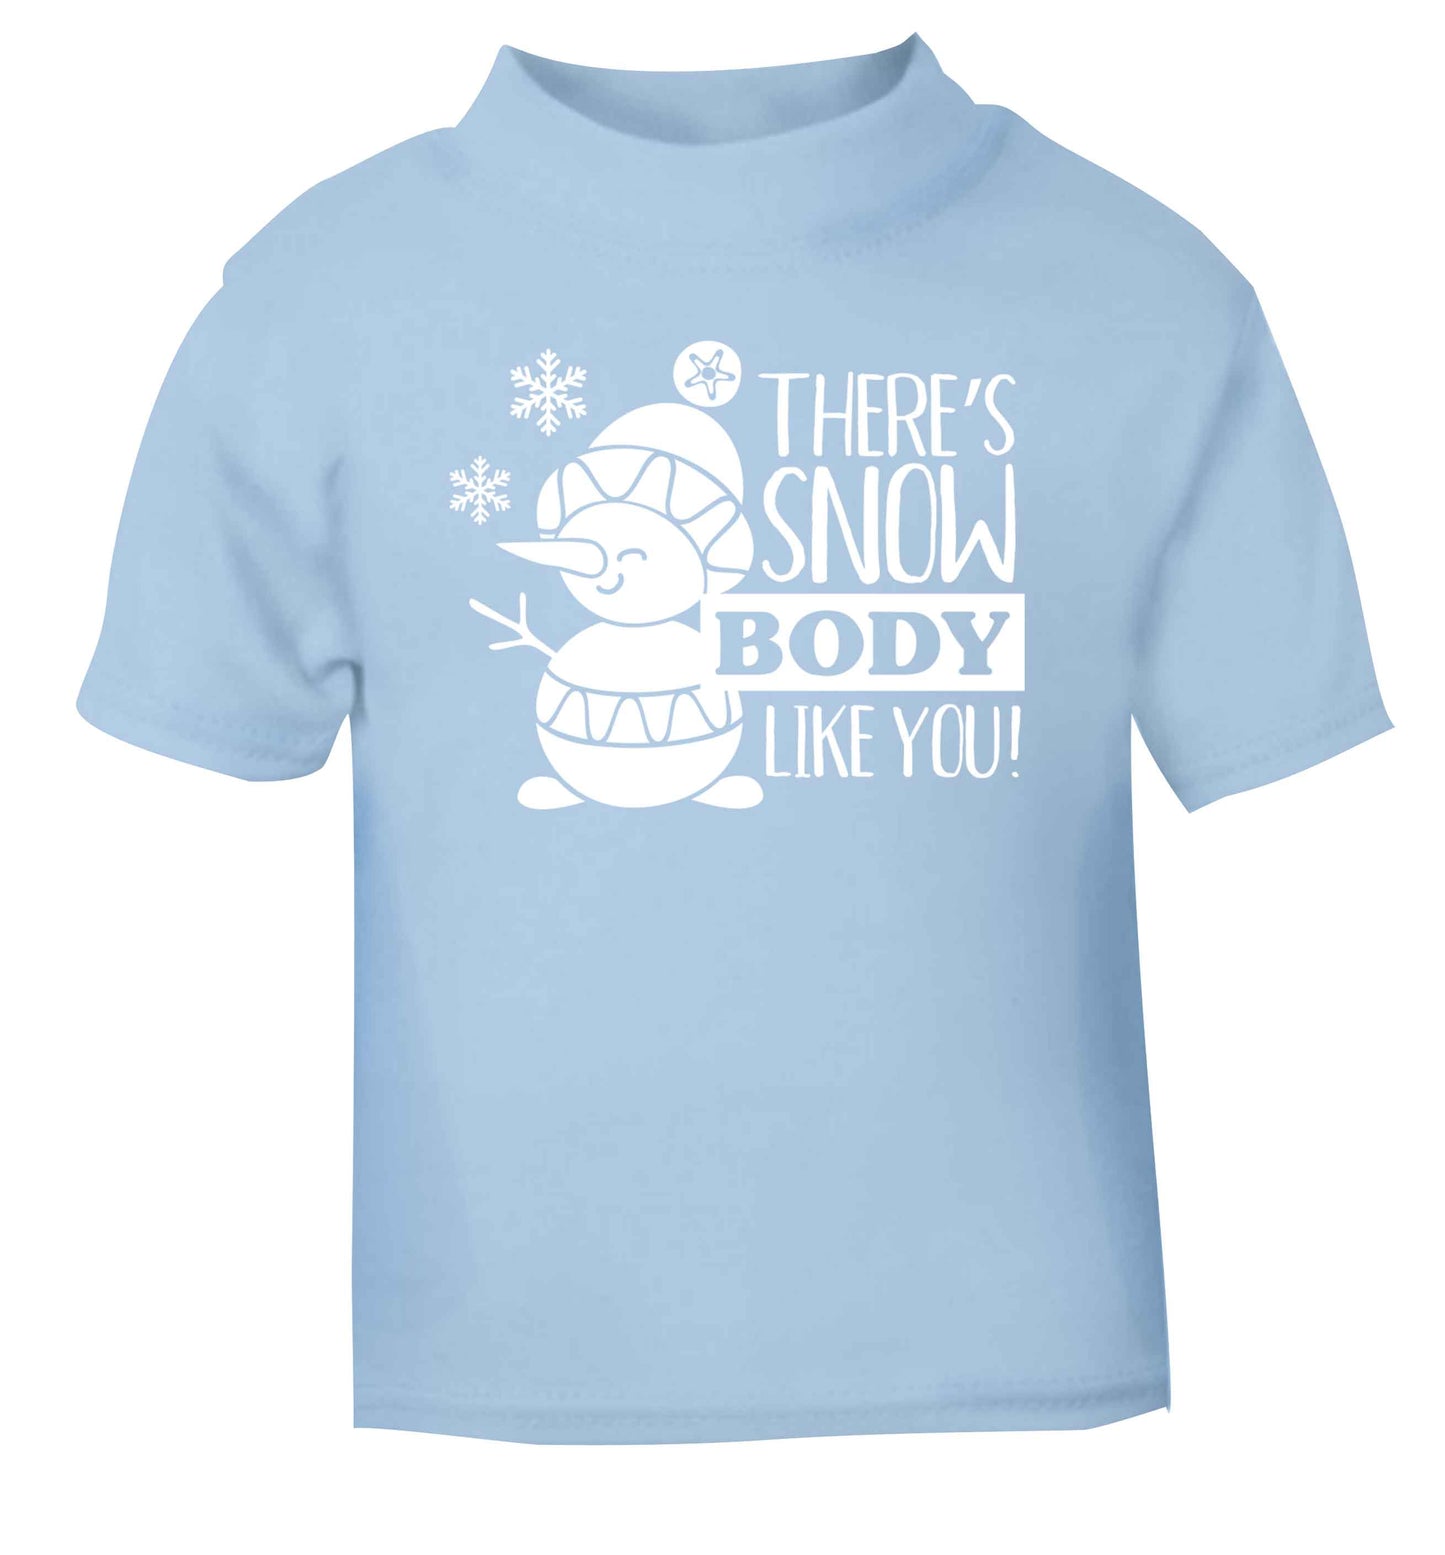 There's snow body like you light blue baby toddler Tshirt 2 Years